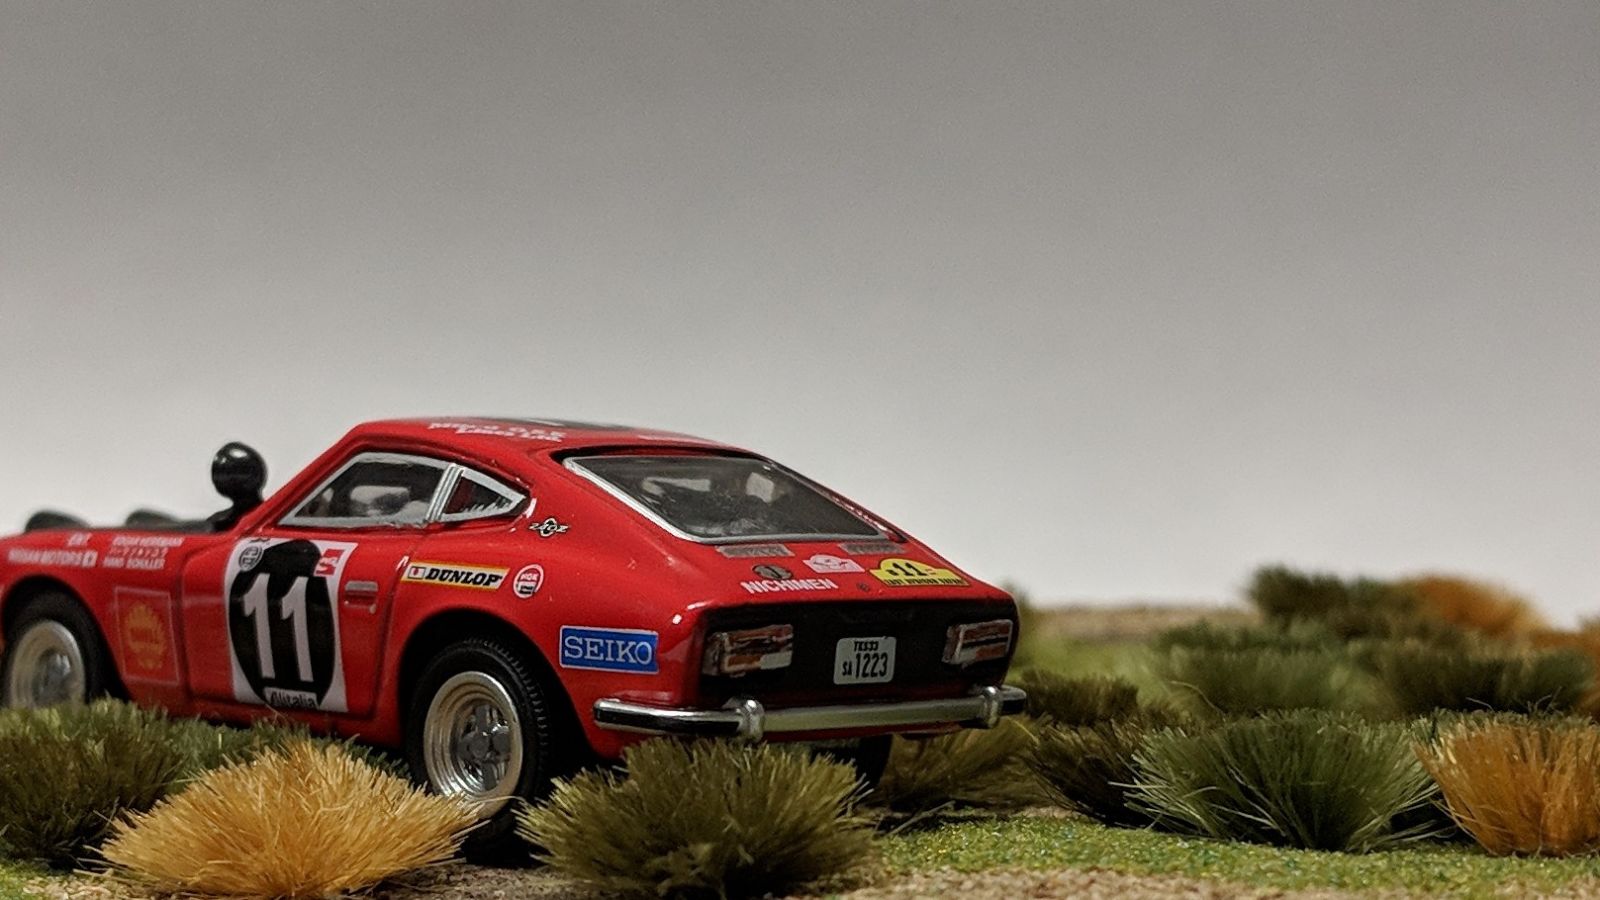 Illustration for article titled [REVIEW] Tomica Nissan Fairlady 240ZG Safari Rally Version